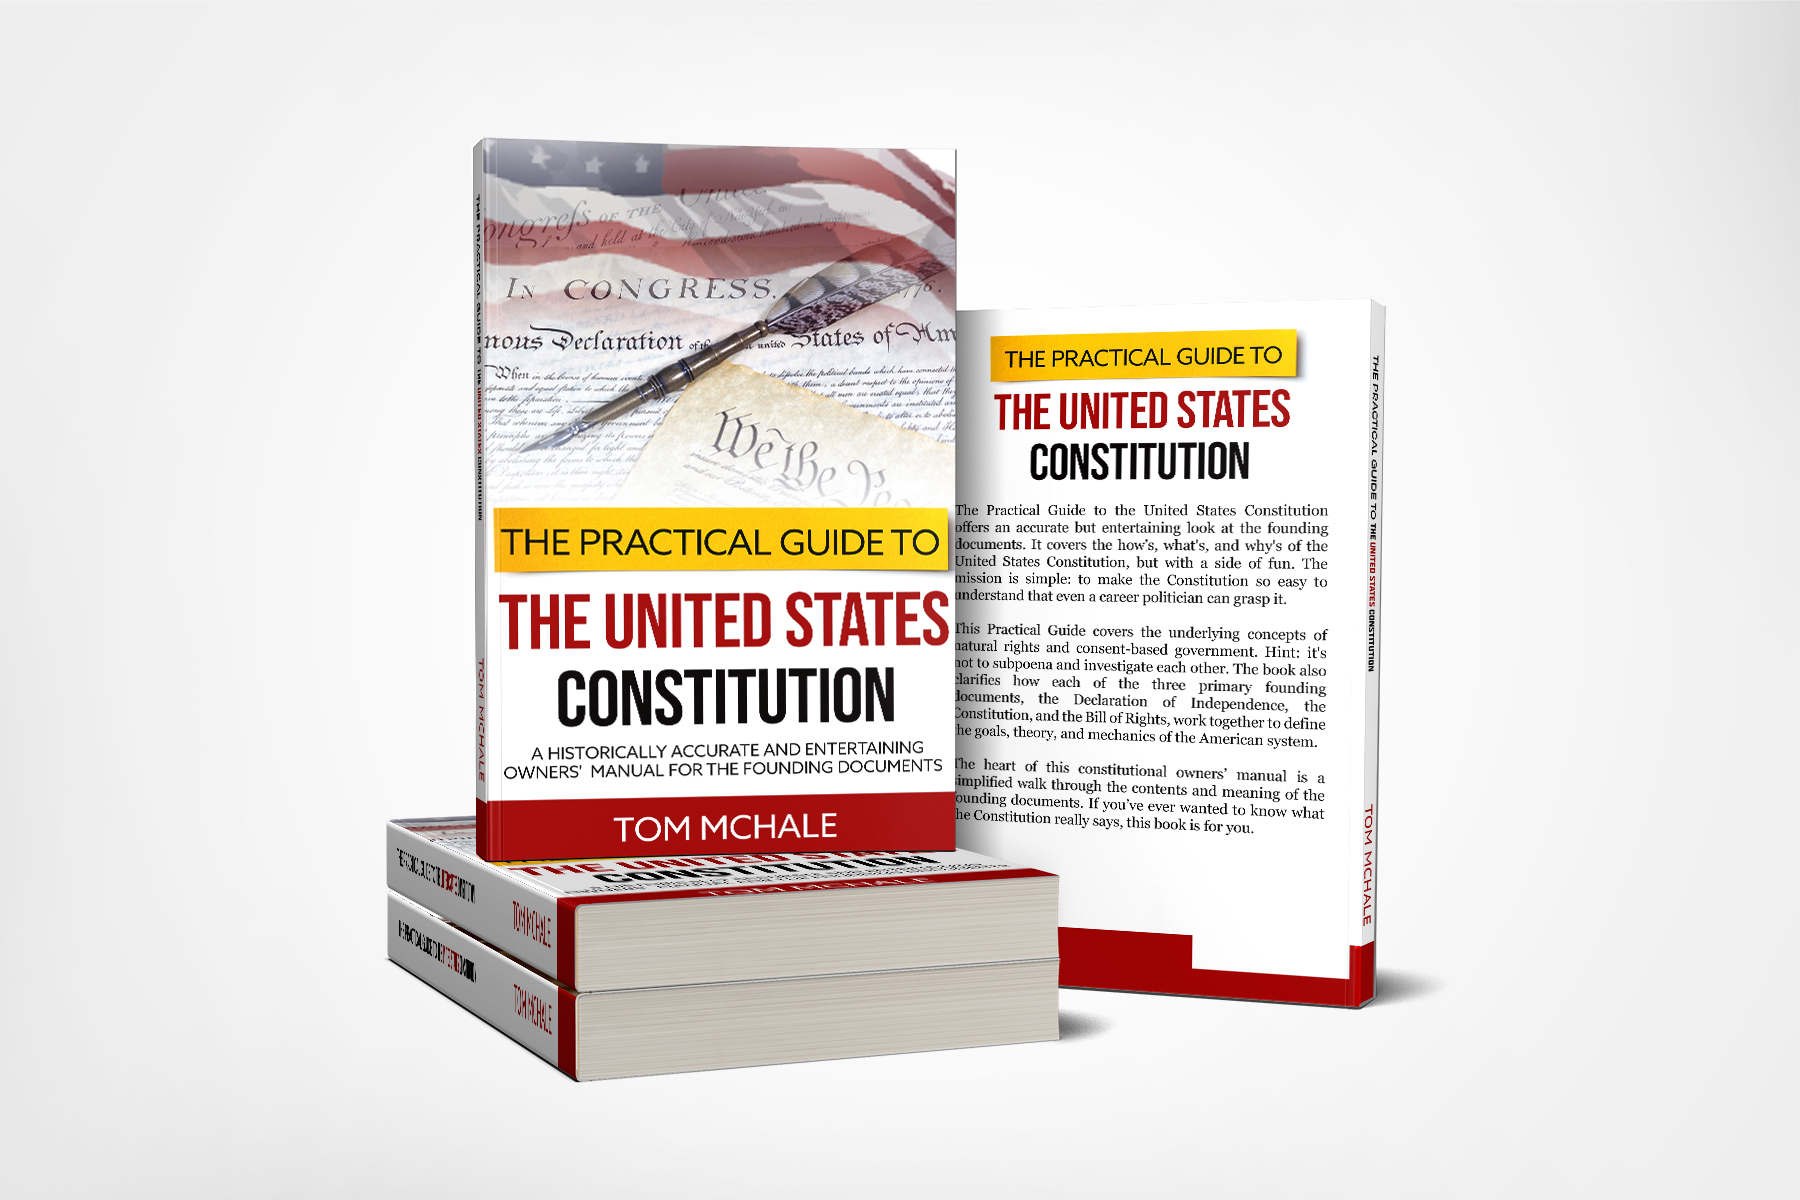 The Practical Guide to the United States Constitution